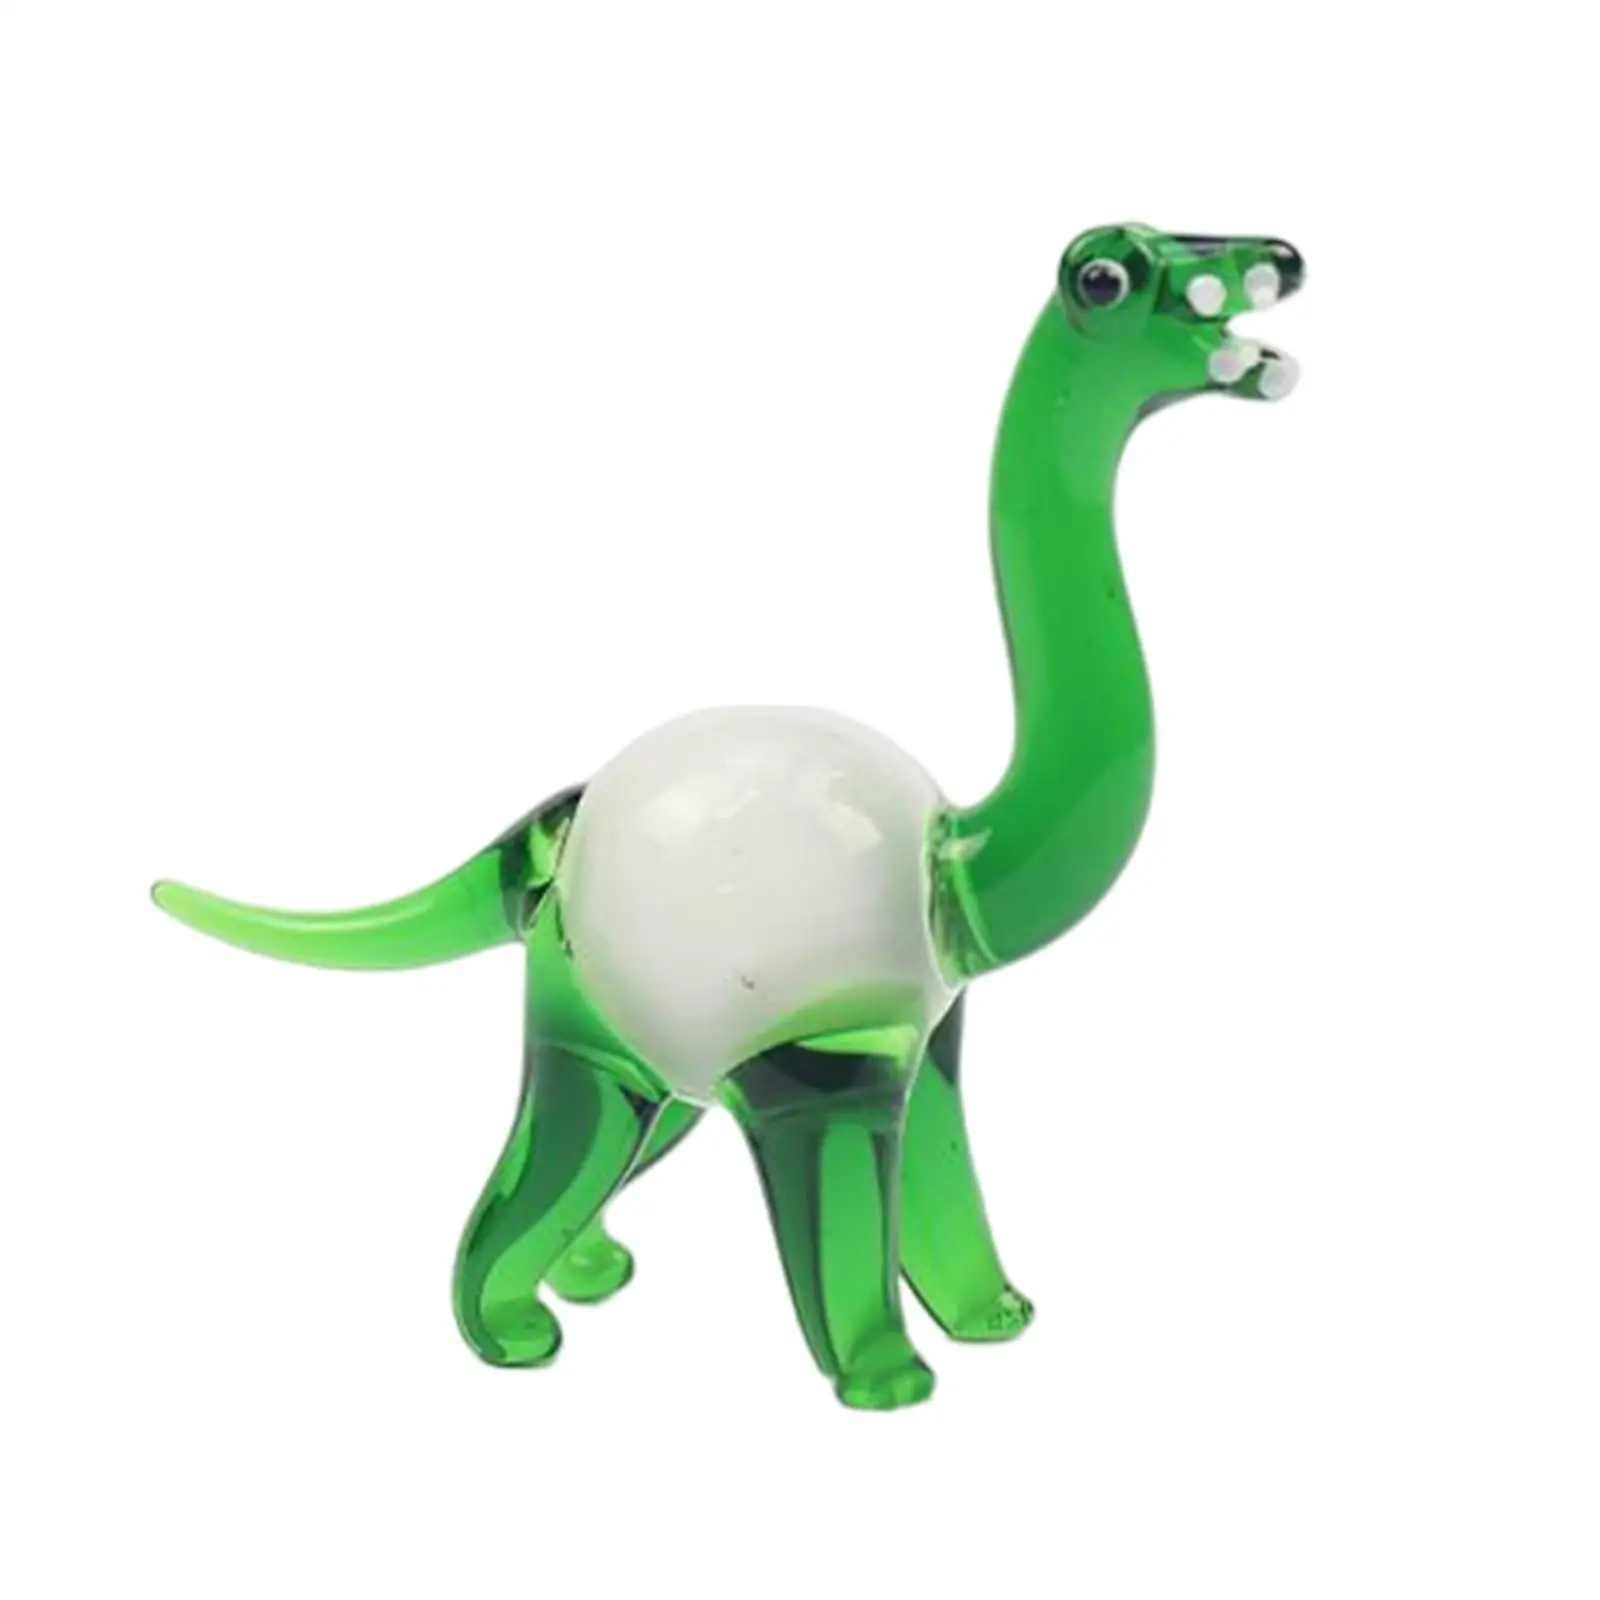 Glass Dinosaur Tiny Delicate Details Animal Statue Figurine Waterproof Resin Outdoor Ornaments Bookshelf or Table Decor